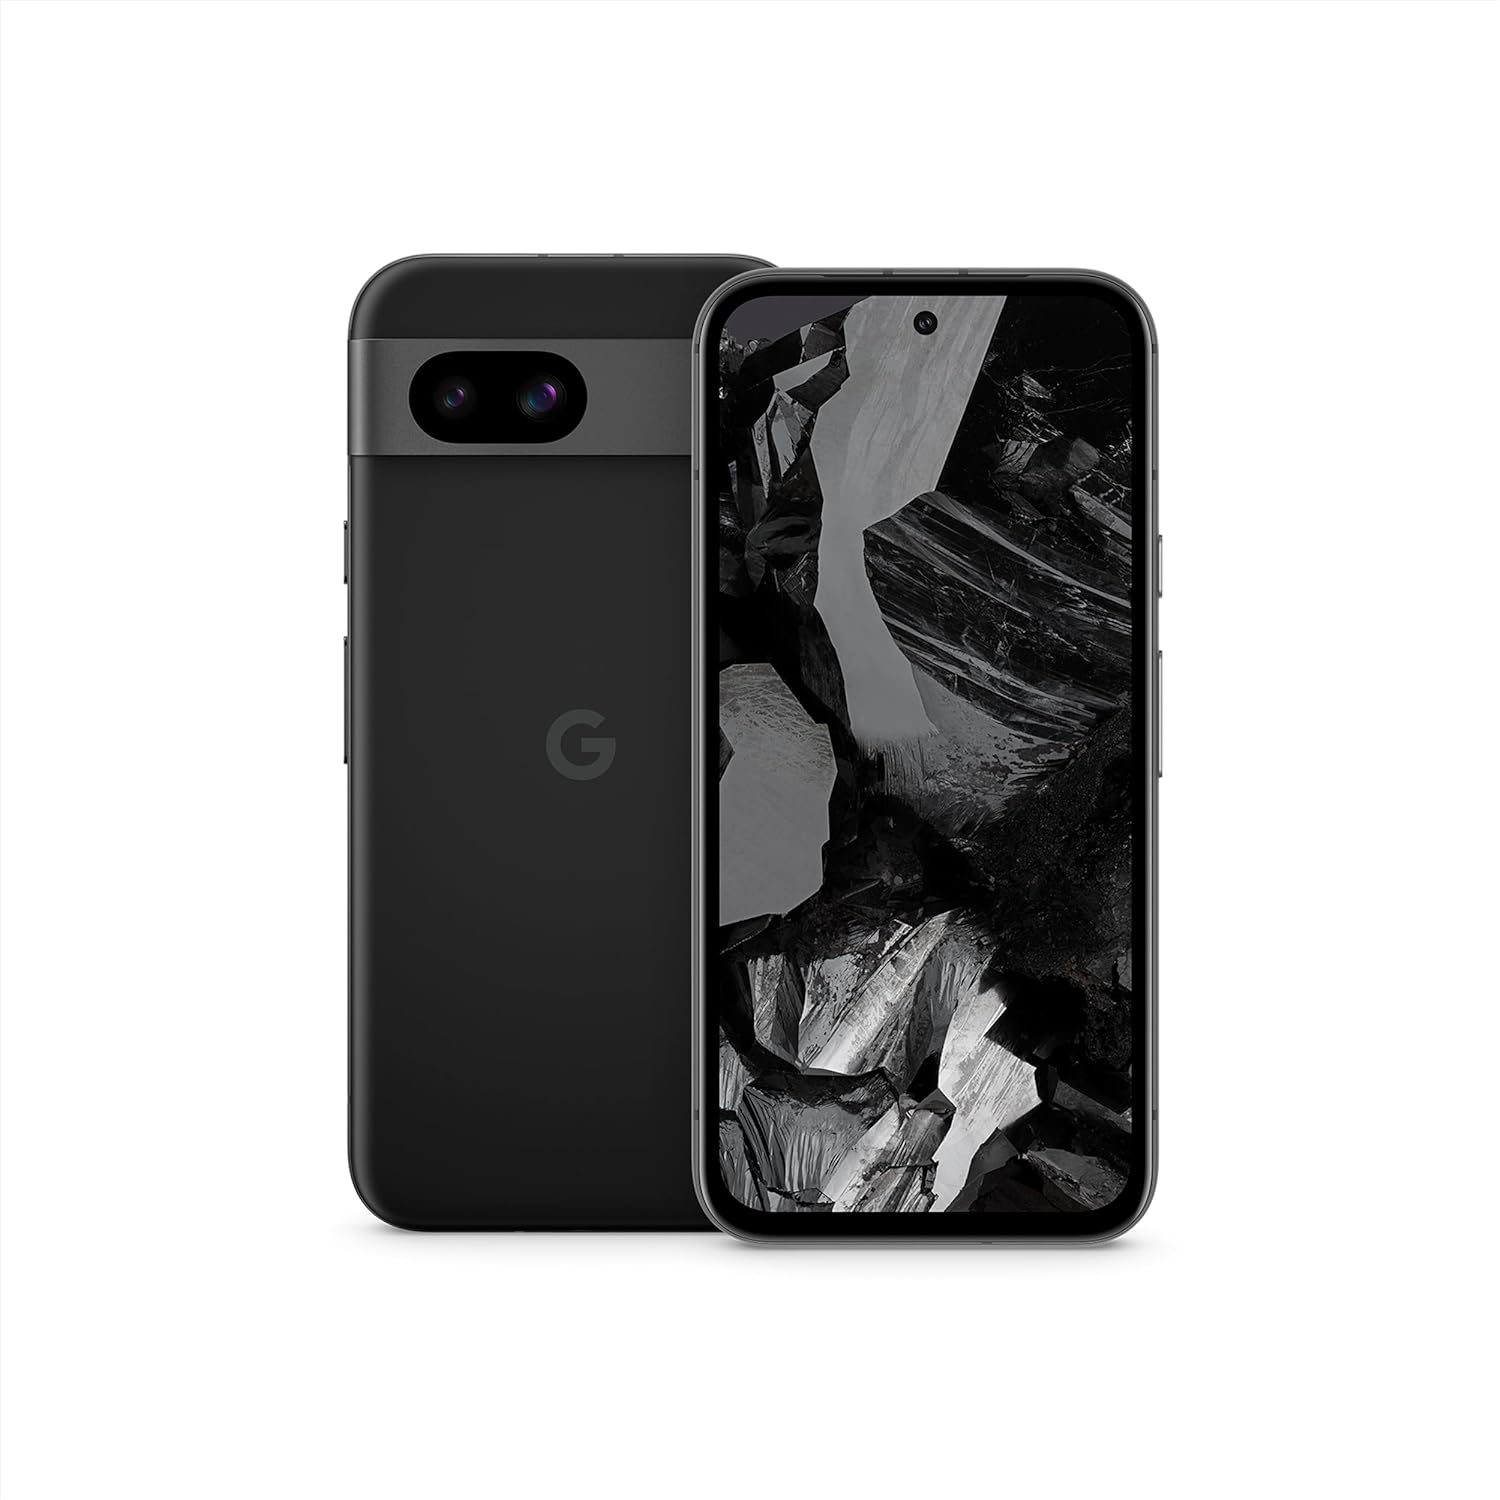 Google Pixel 8a - Unlocked Android Phone with Google AI, Advanced Pixel Camera and 24-Hour Battery - Aloe - 128 GB